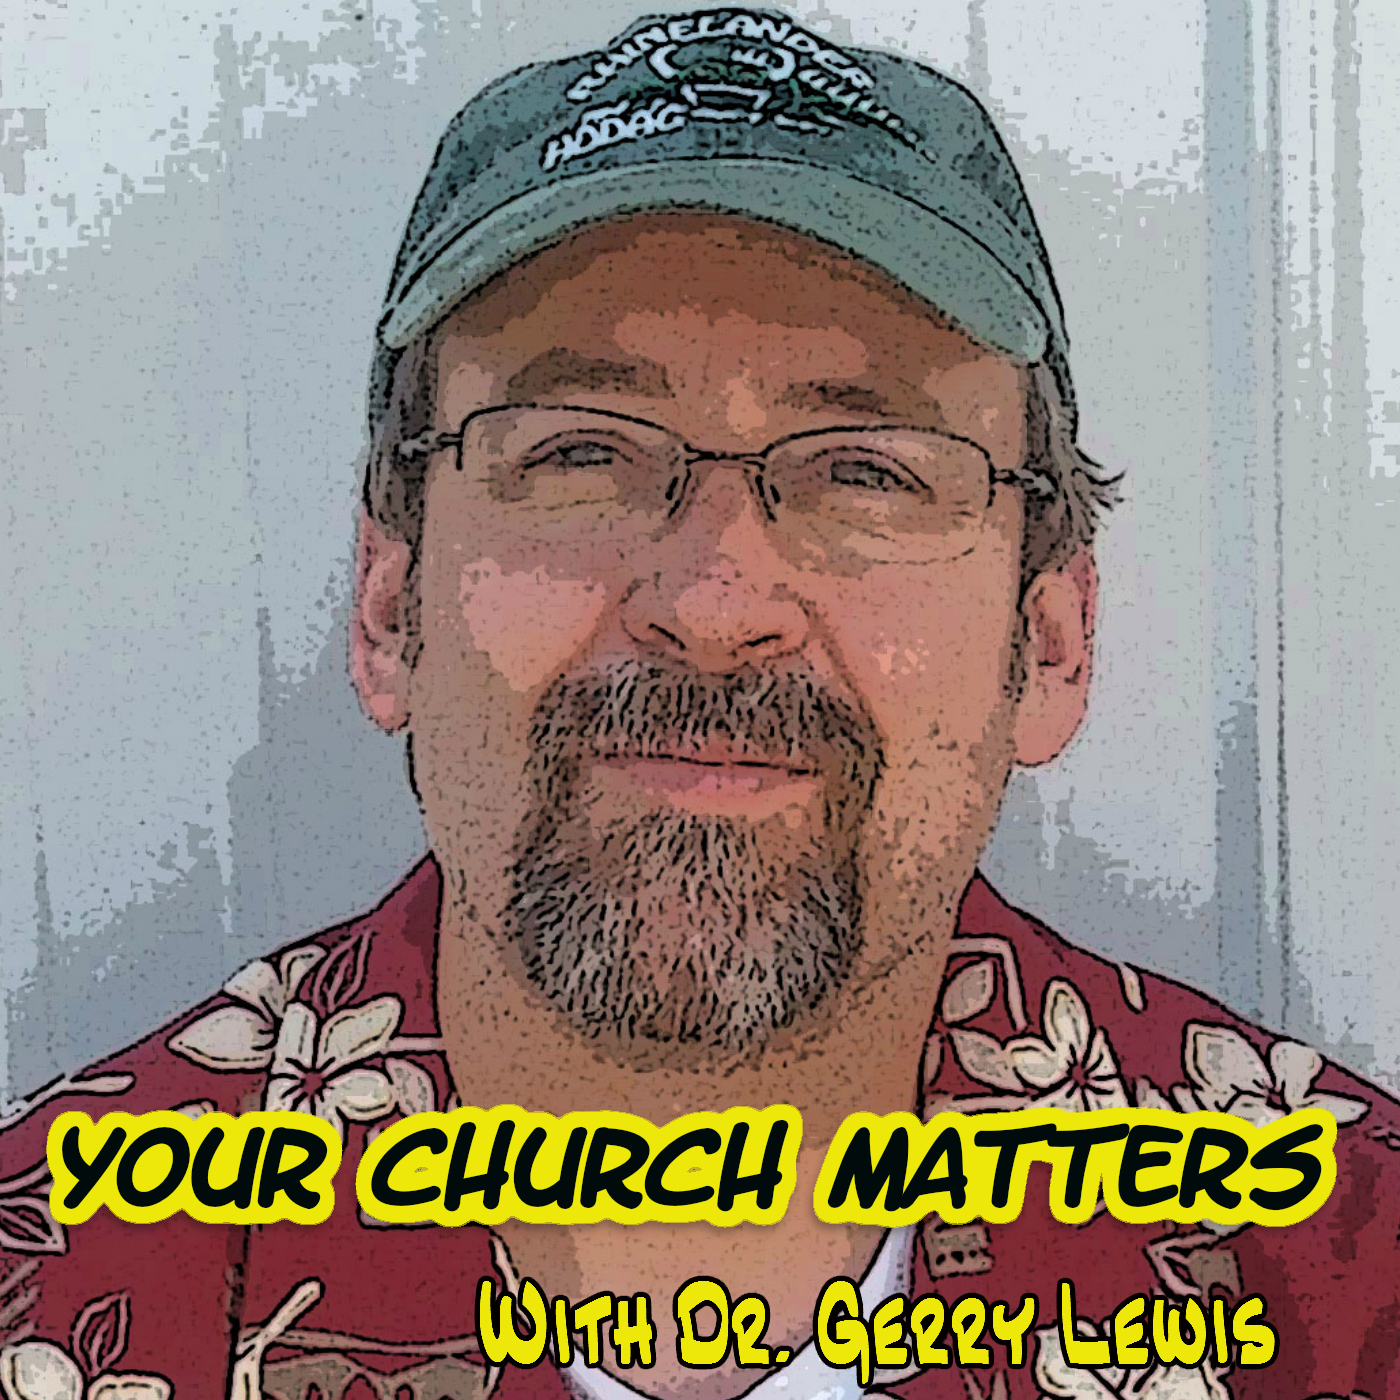 Your Church Matters Podcast with Dr. Gerry Lewis - A podcast for pastors and church leaders. You church matters and you are significant.